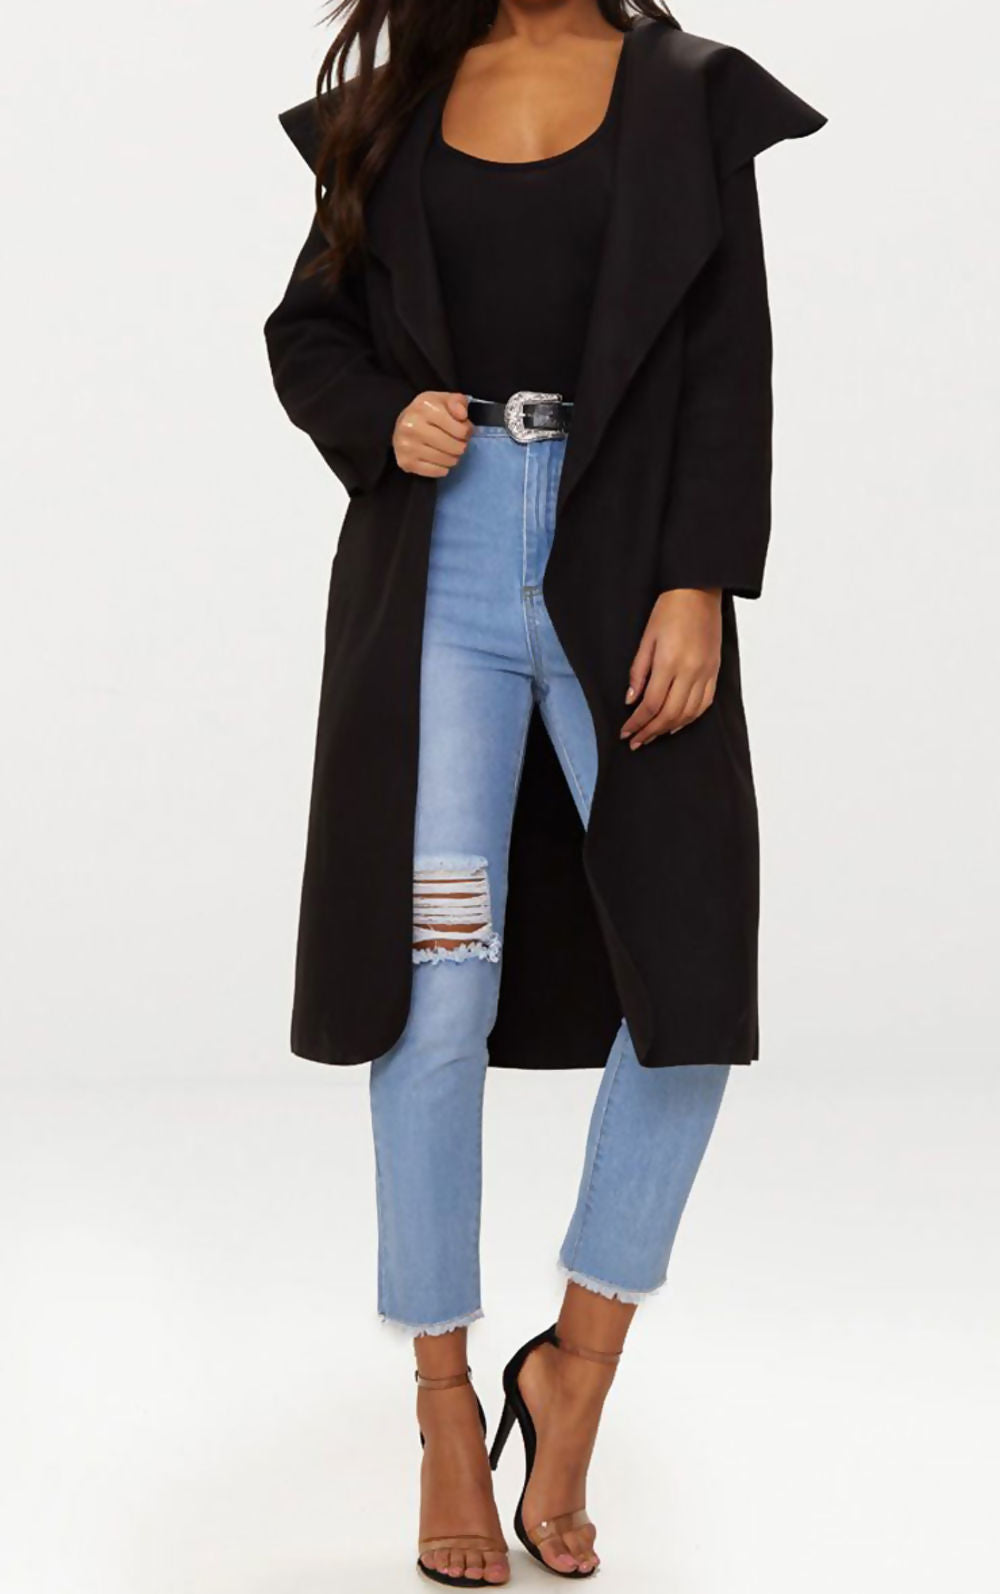 Black long duster coat with complimentary belt. Model faces forward with the duster coat open. Model holds onto one side of the duster coat.